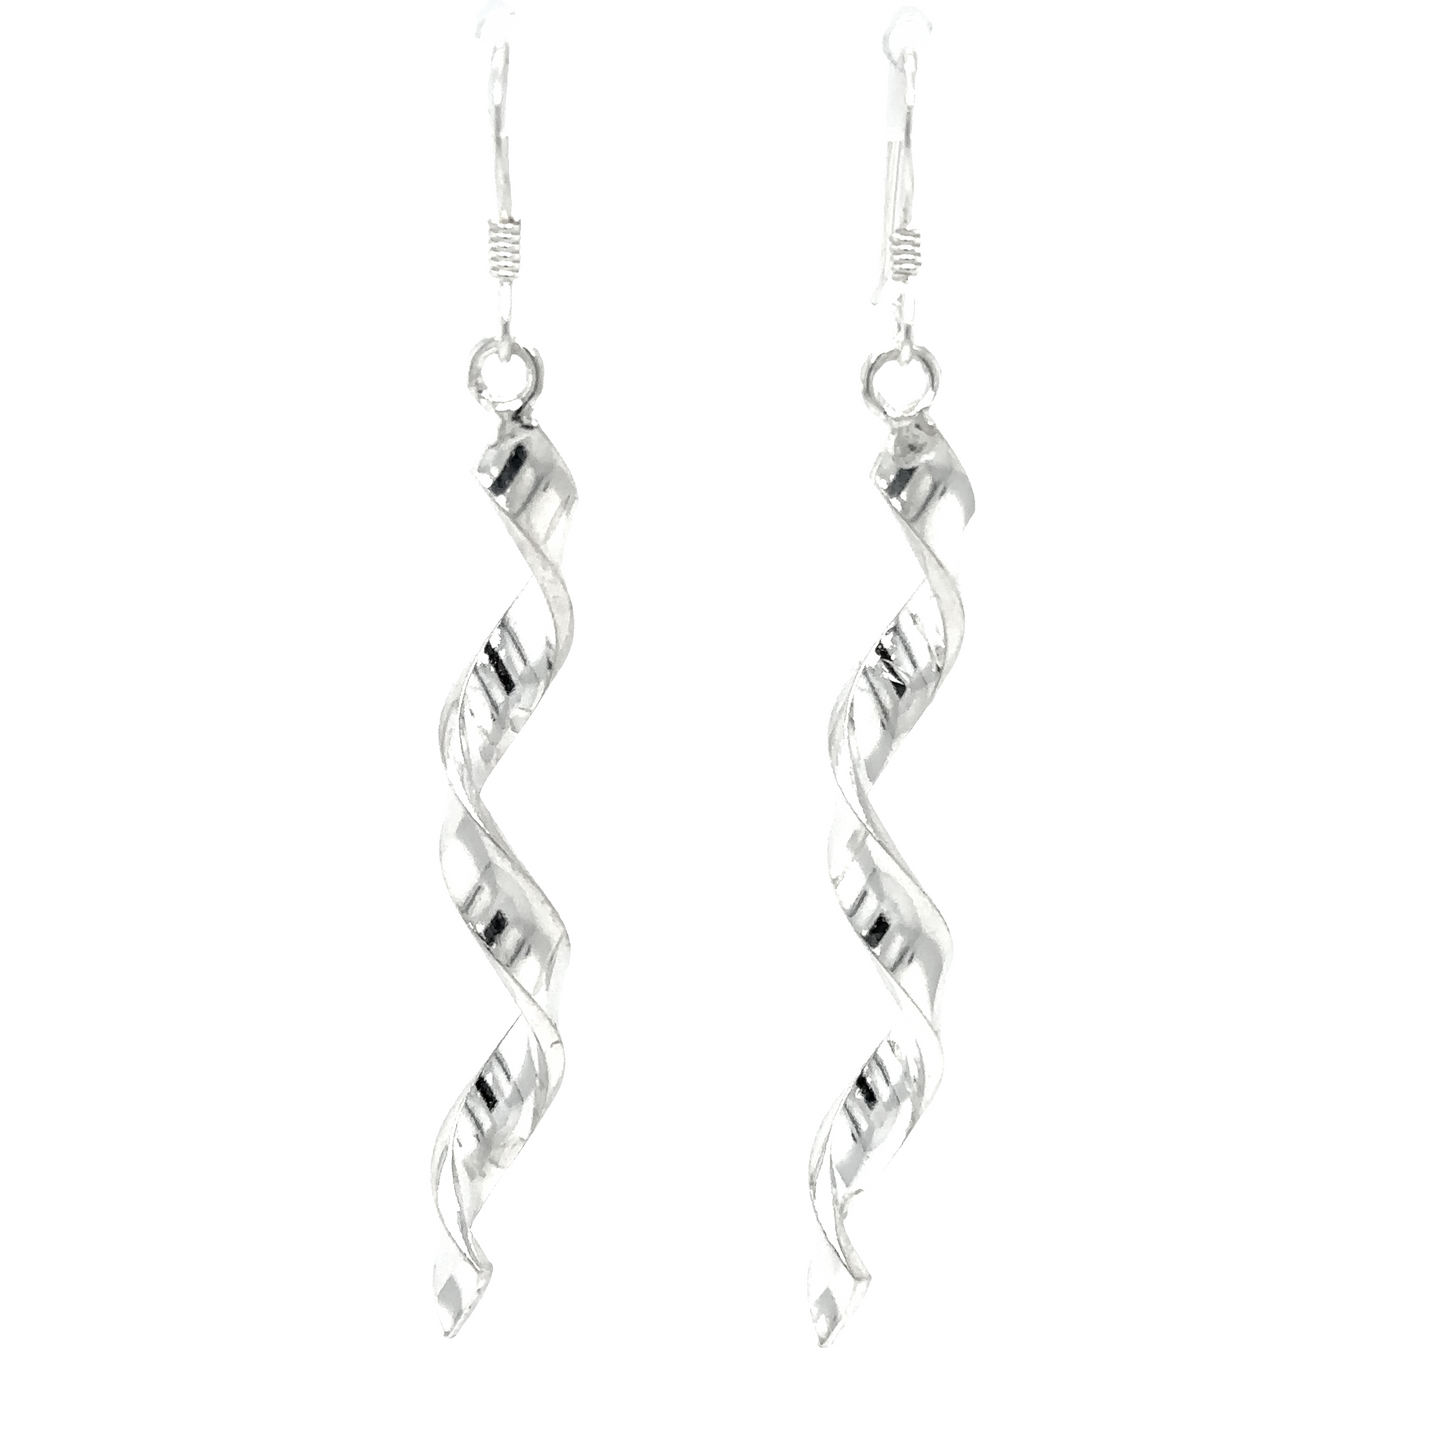 A pair of Simple Twisted Earrings by Super Silver on a white background made of .925 Silver.